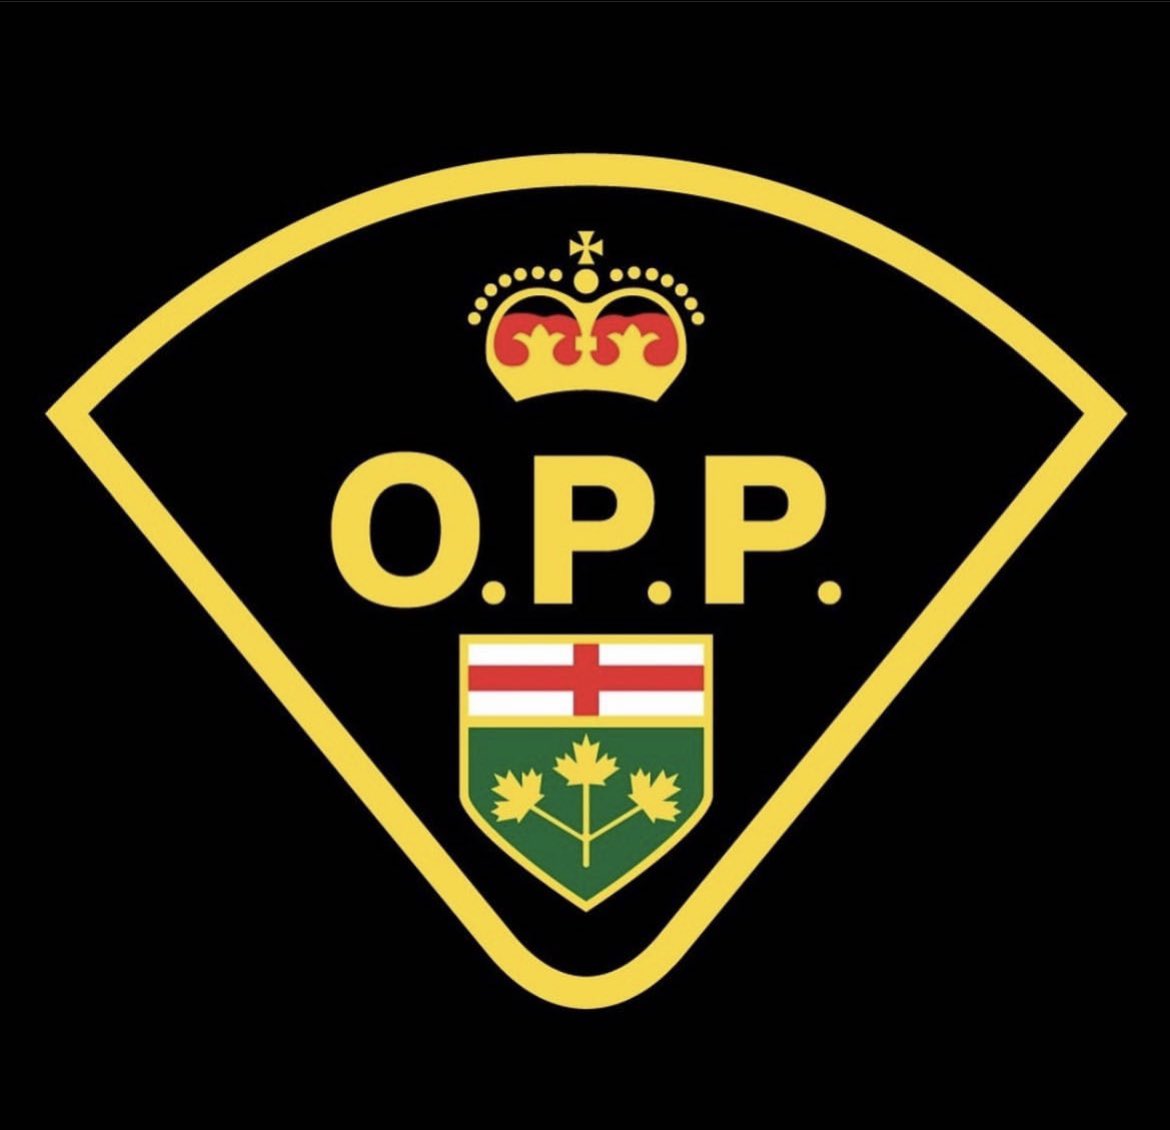 Our emotions run high once again and our thoughts lie with our colleagues and friends in the @OPPAssociation. Another tragic loss. #police